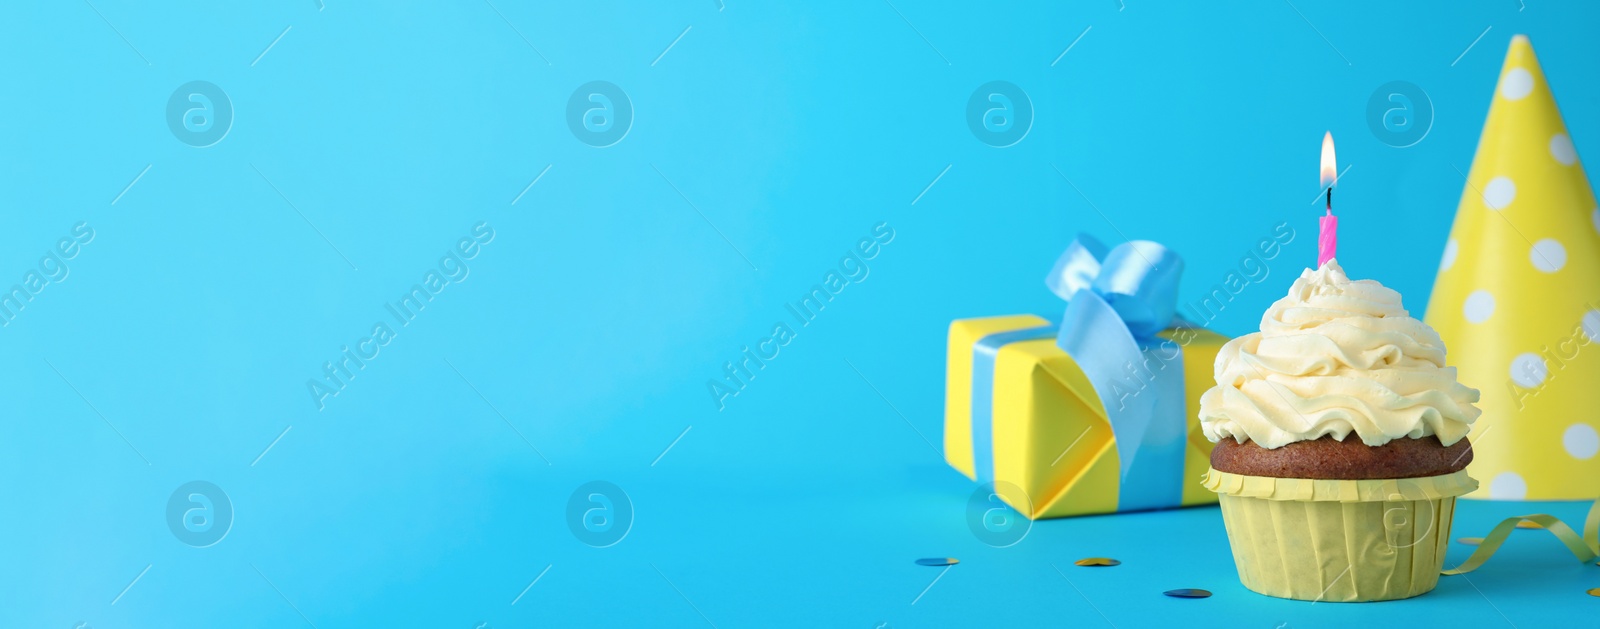 Image of Delicious birthday cupcake with candle on turquoise background, space for text. Banner design